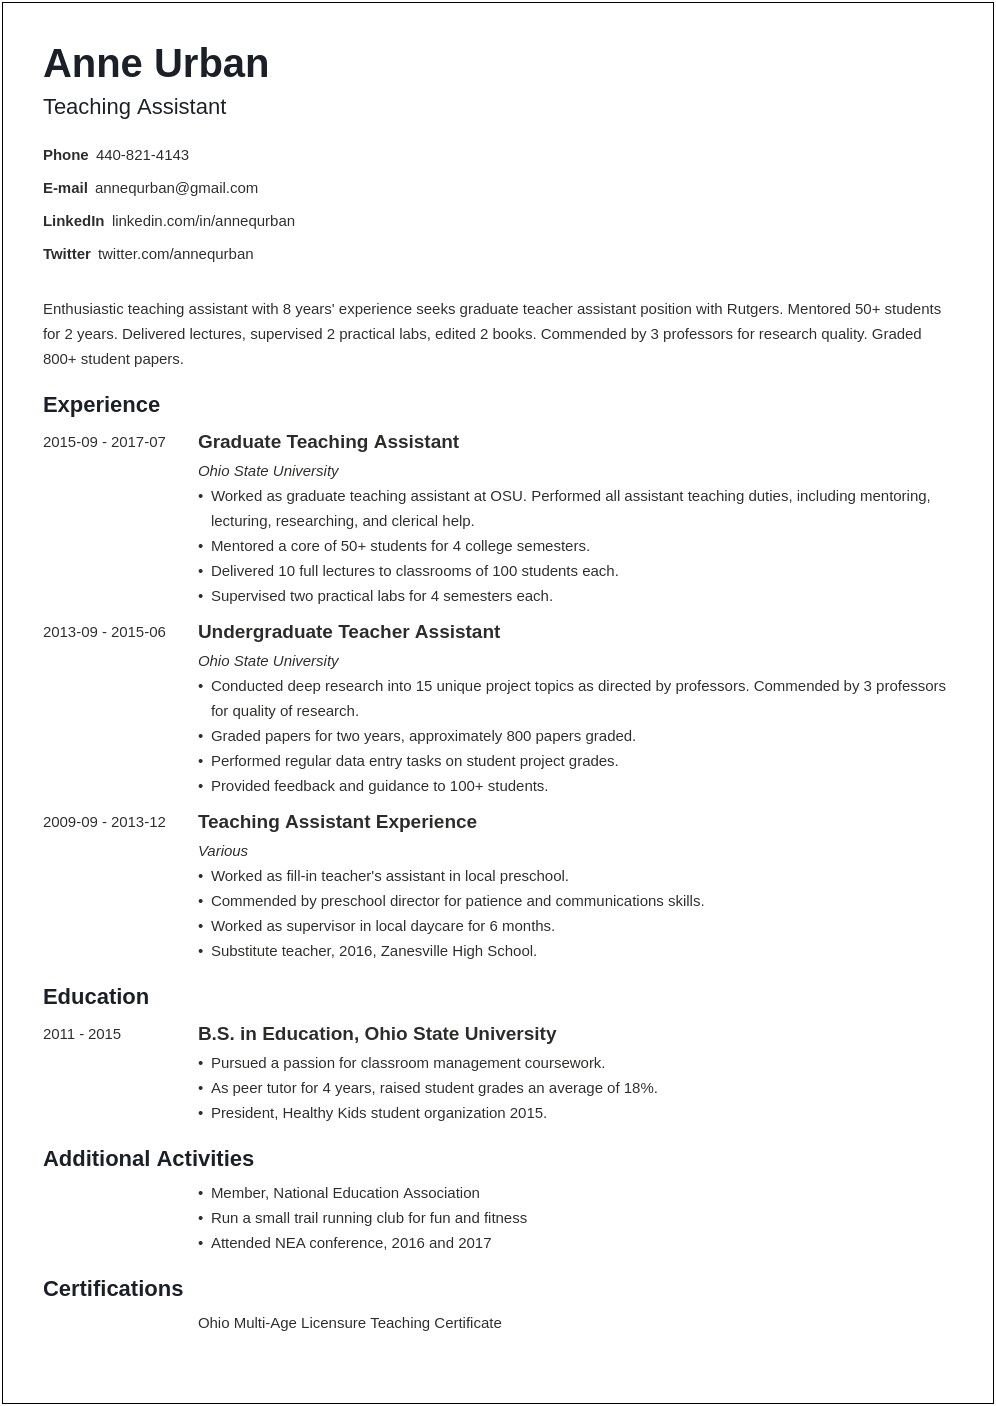 Best Type Font For Resumes In 2019